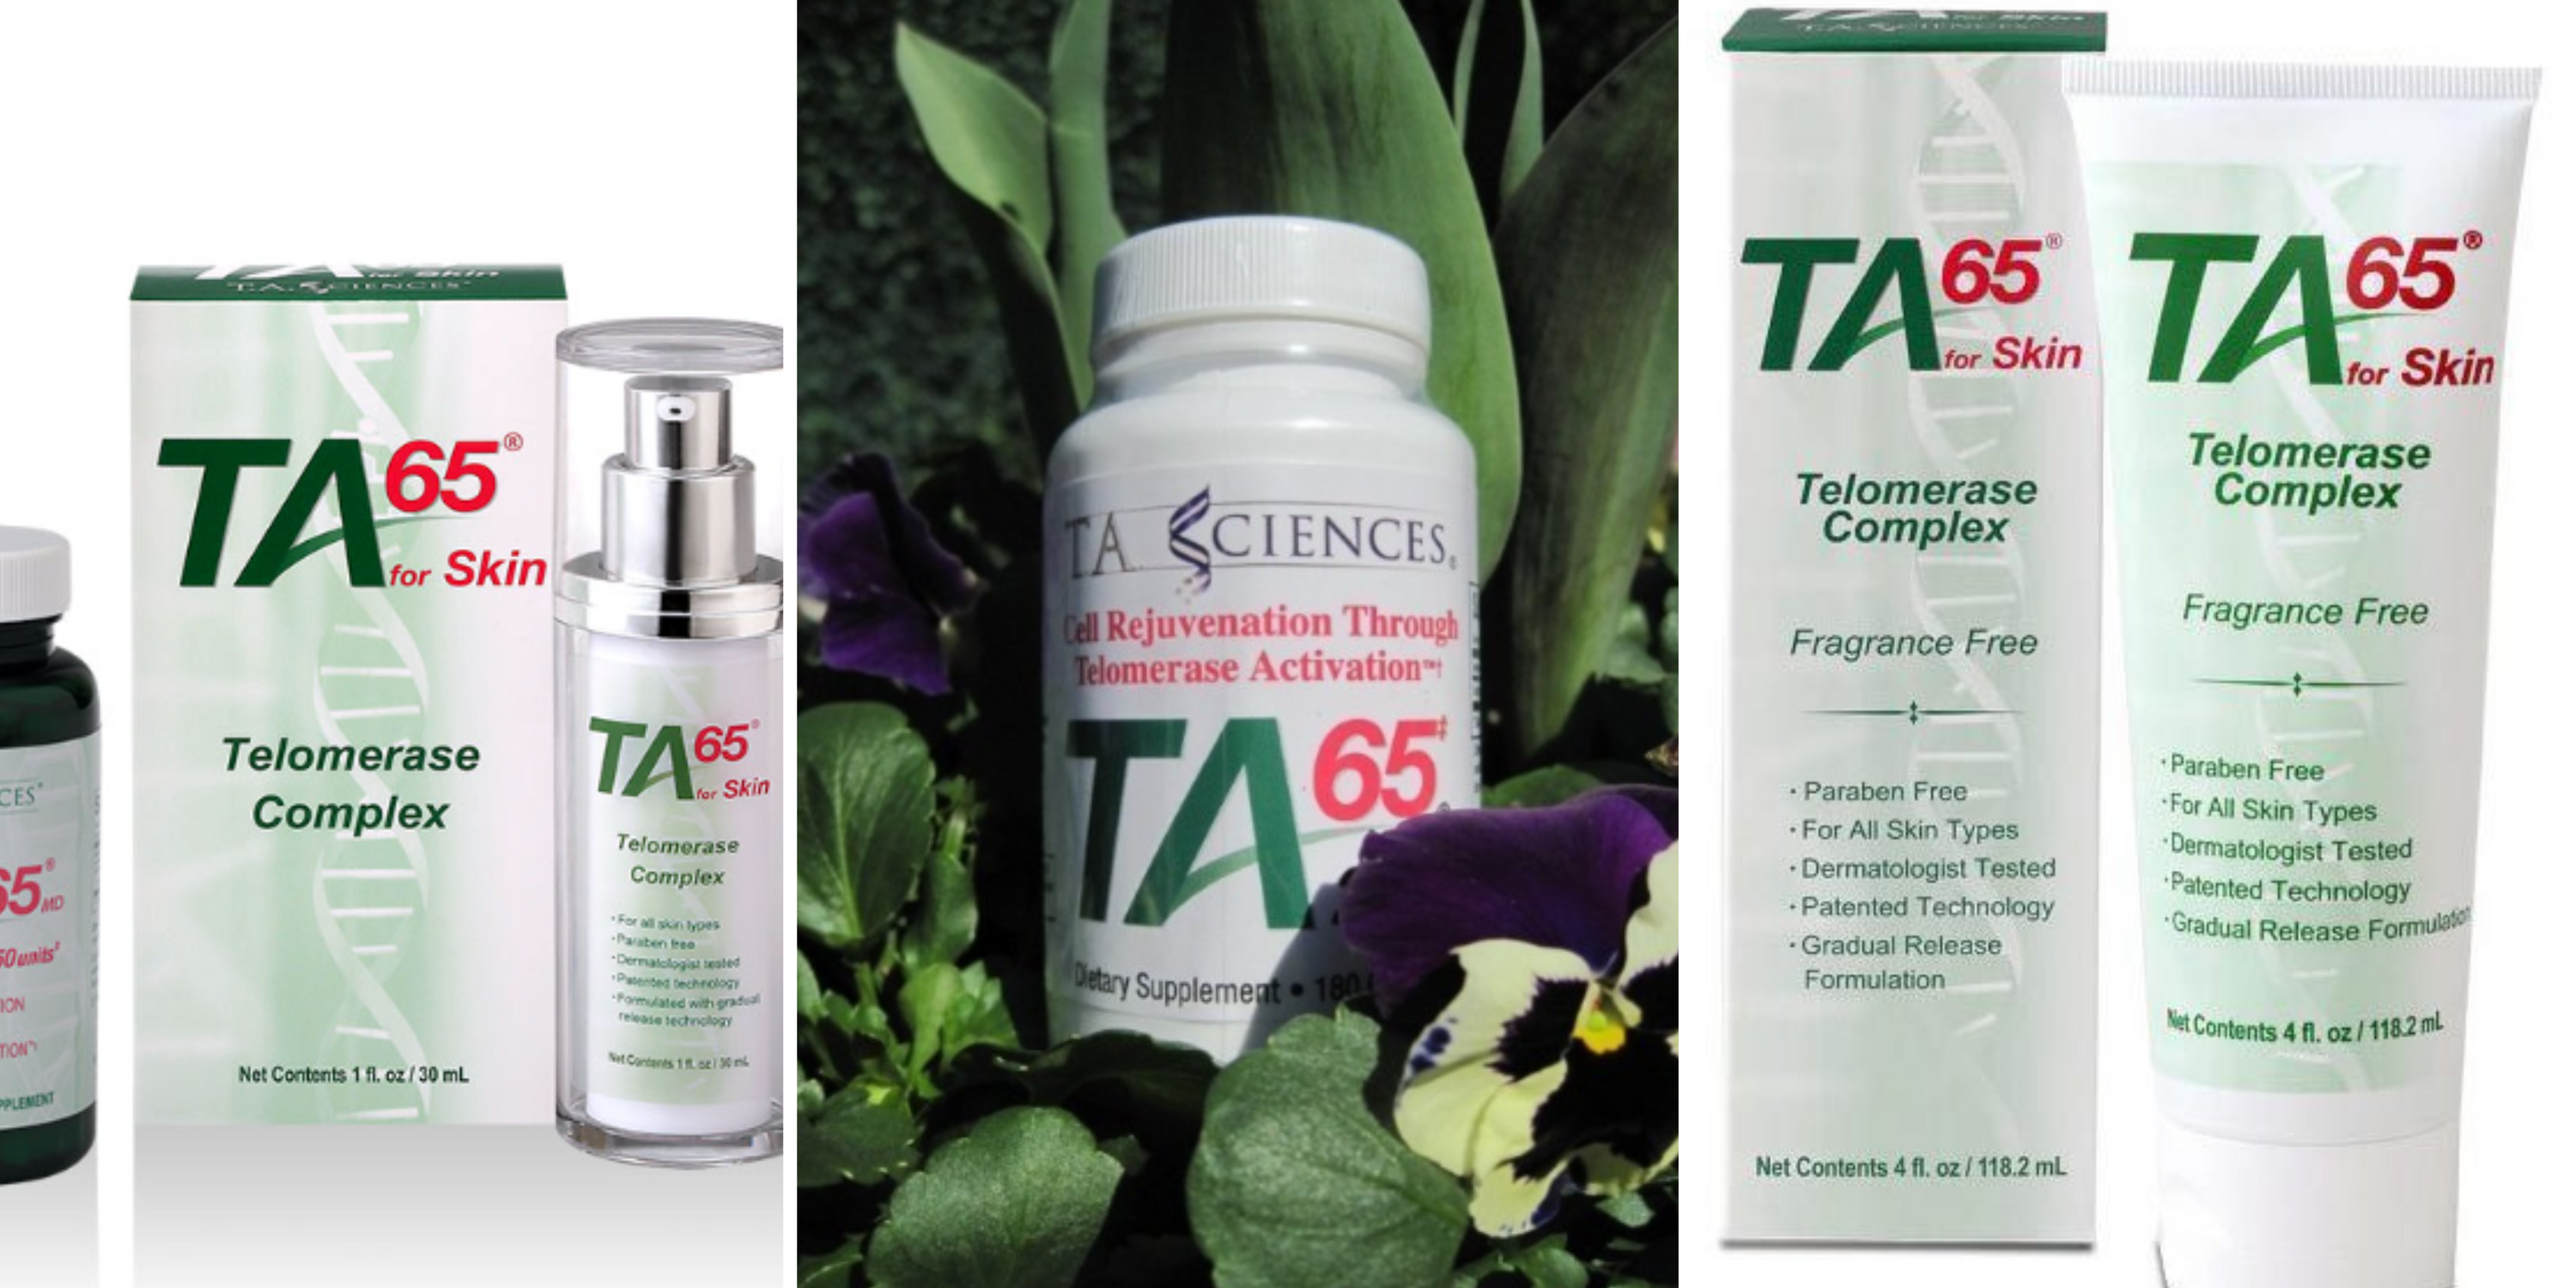 What Are The Benefits of TA-65?